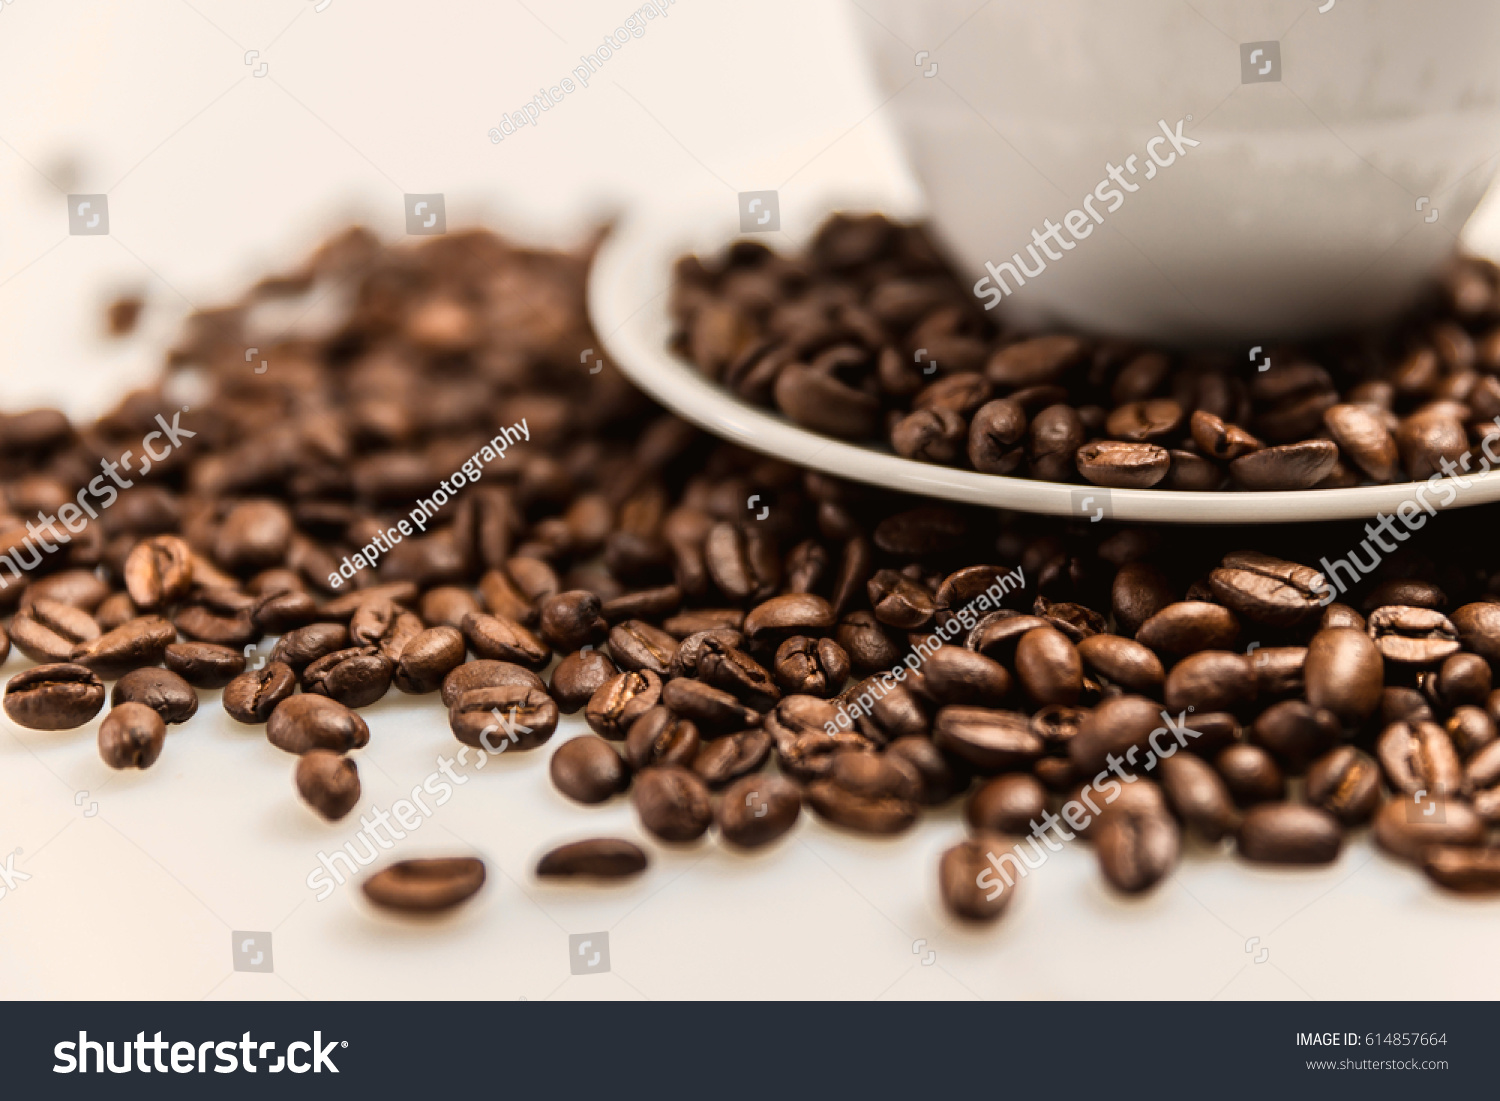 Download High Angle Closeup View Coffee Cup Stock Image Download Now PSD Mockup Templates